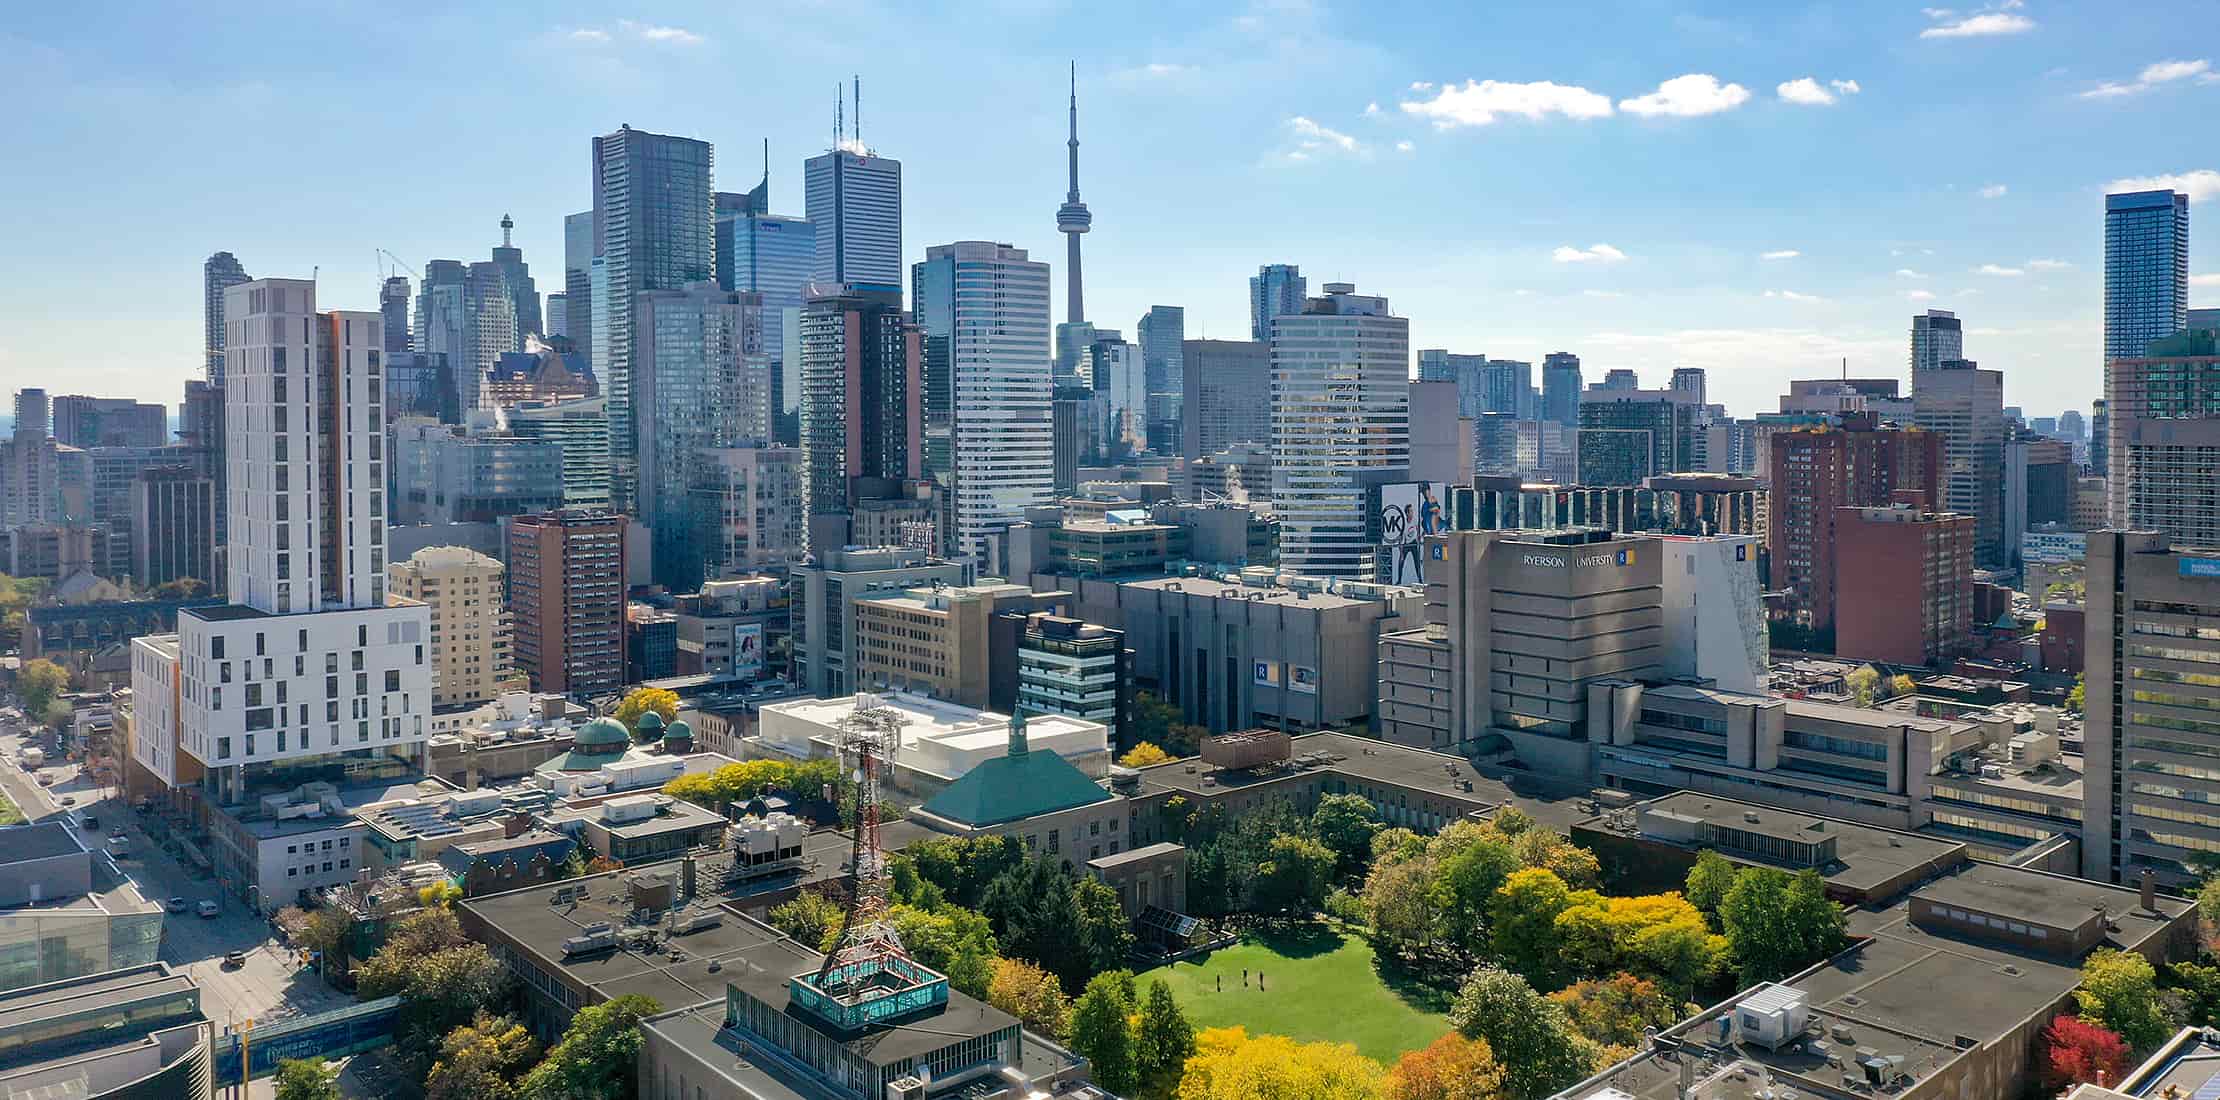 A photo of the Toronto skyline with the Toronto Metropolitan University (formerly Ryerson University) campus in the foreground